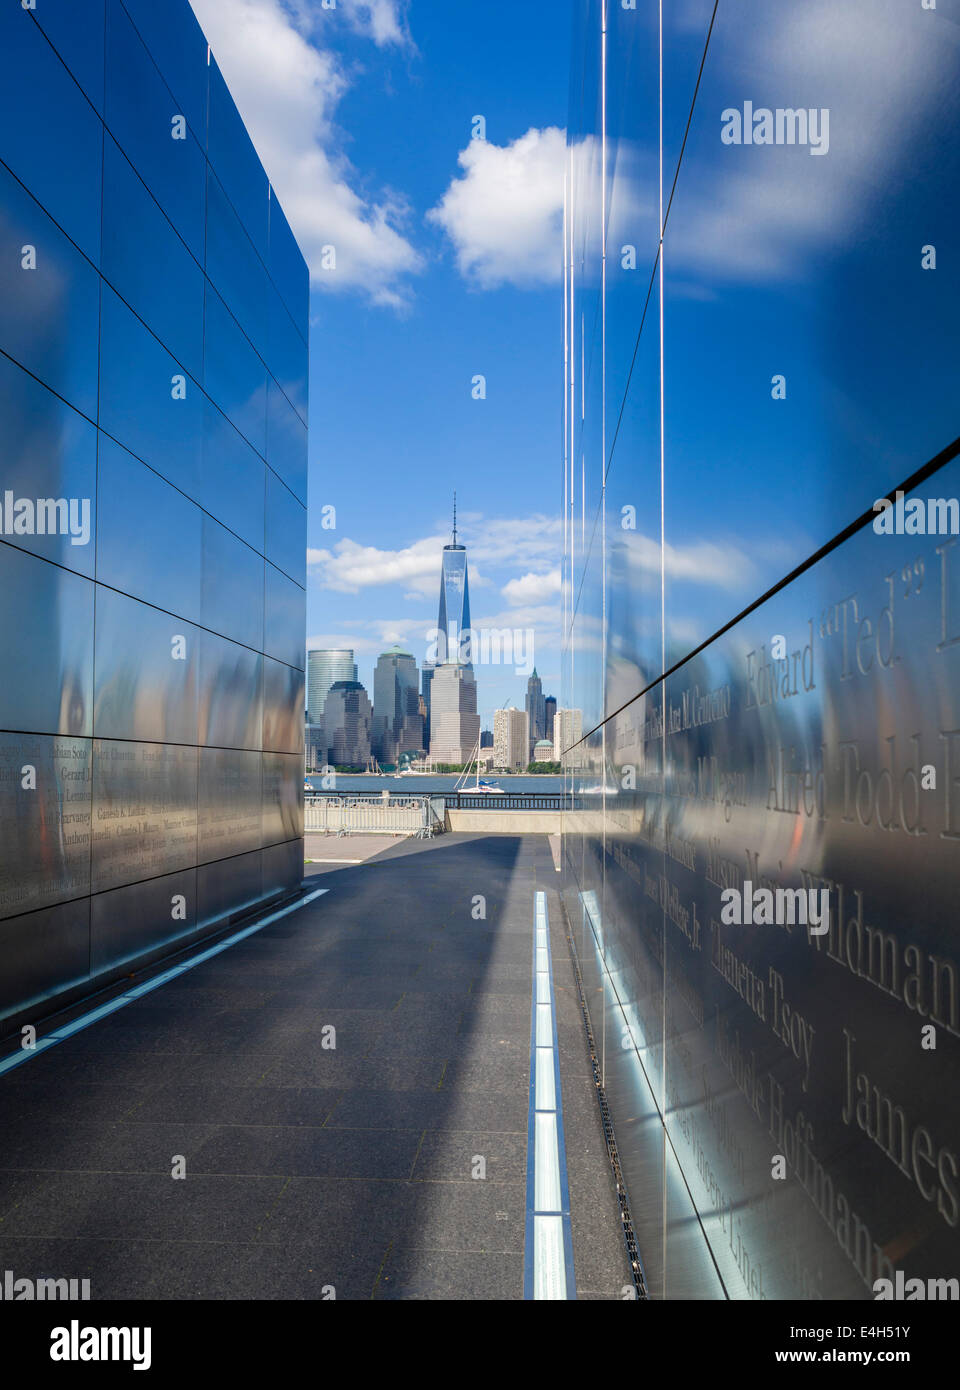 The Empty Sky Memorial to 9/11 victims in Liberty State Park, NJ with One World Trade Center in New York in distance, NY, USA Stock Photo